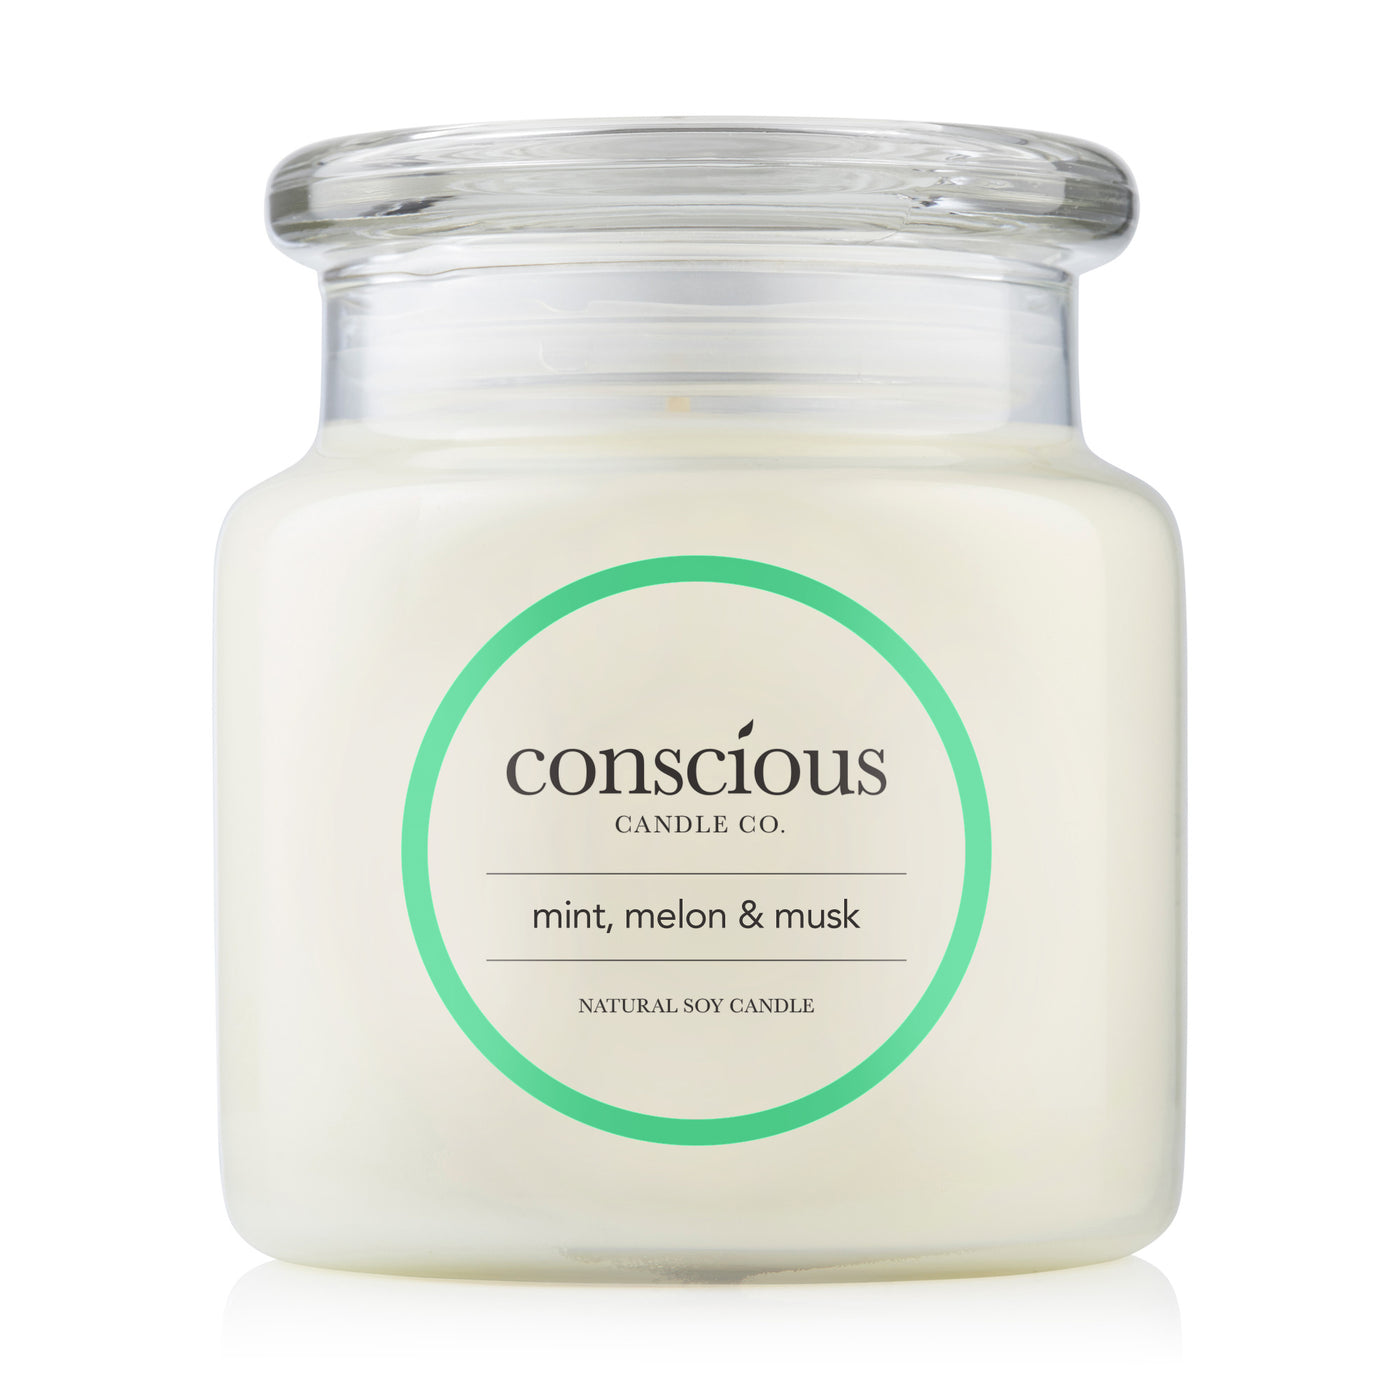 Mint, Melon & Musk 510g Natural Soy Candle